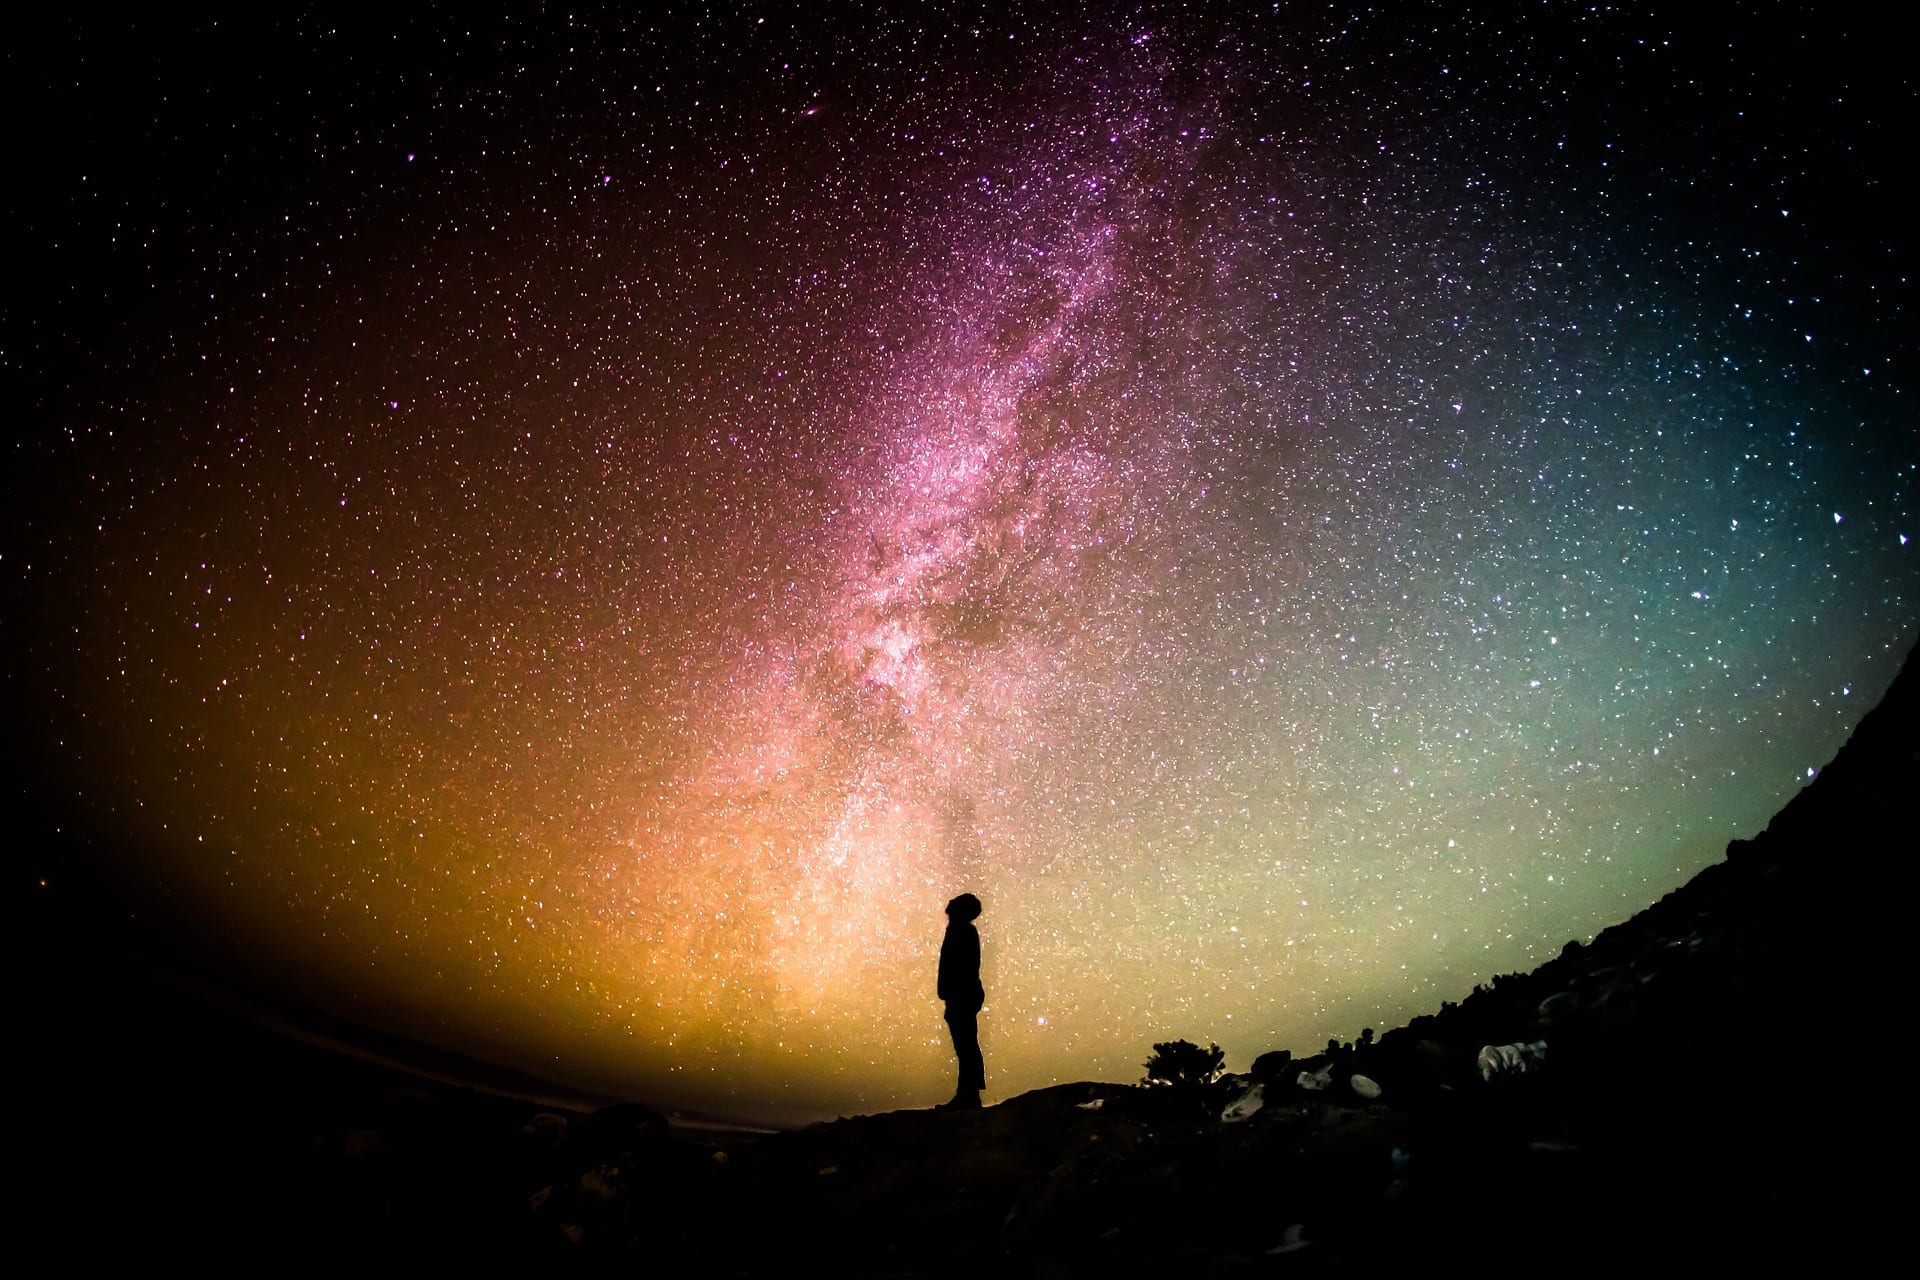 A man stands and looks up into a very starry sky.